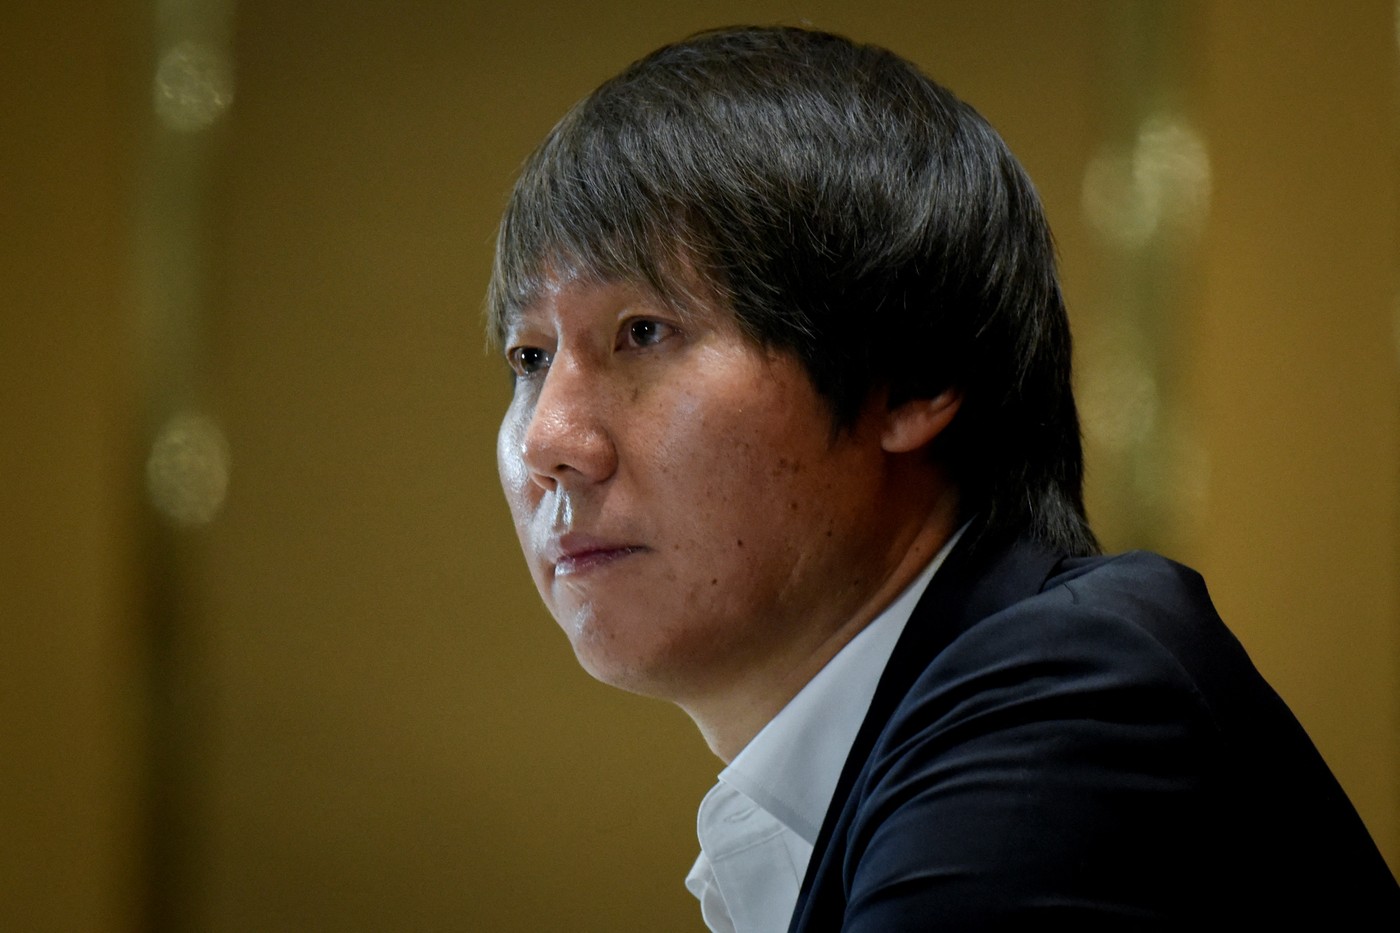 (FILES) Li Tie, the head coach of China men's national football team, attends a press conference in Beijing on January 5, 2020. Former China coach and ex-Everton midfielder Li Tie went on trial on March 28, 2024 on allegations of bribery, state media said, part of a broader crackdown on corruption in football in the country.,Image: 860255386, License: Rights-managed, Restrictions: , Model Release: no, Credit line: WANG Zhao / AFP / Profimedia